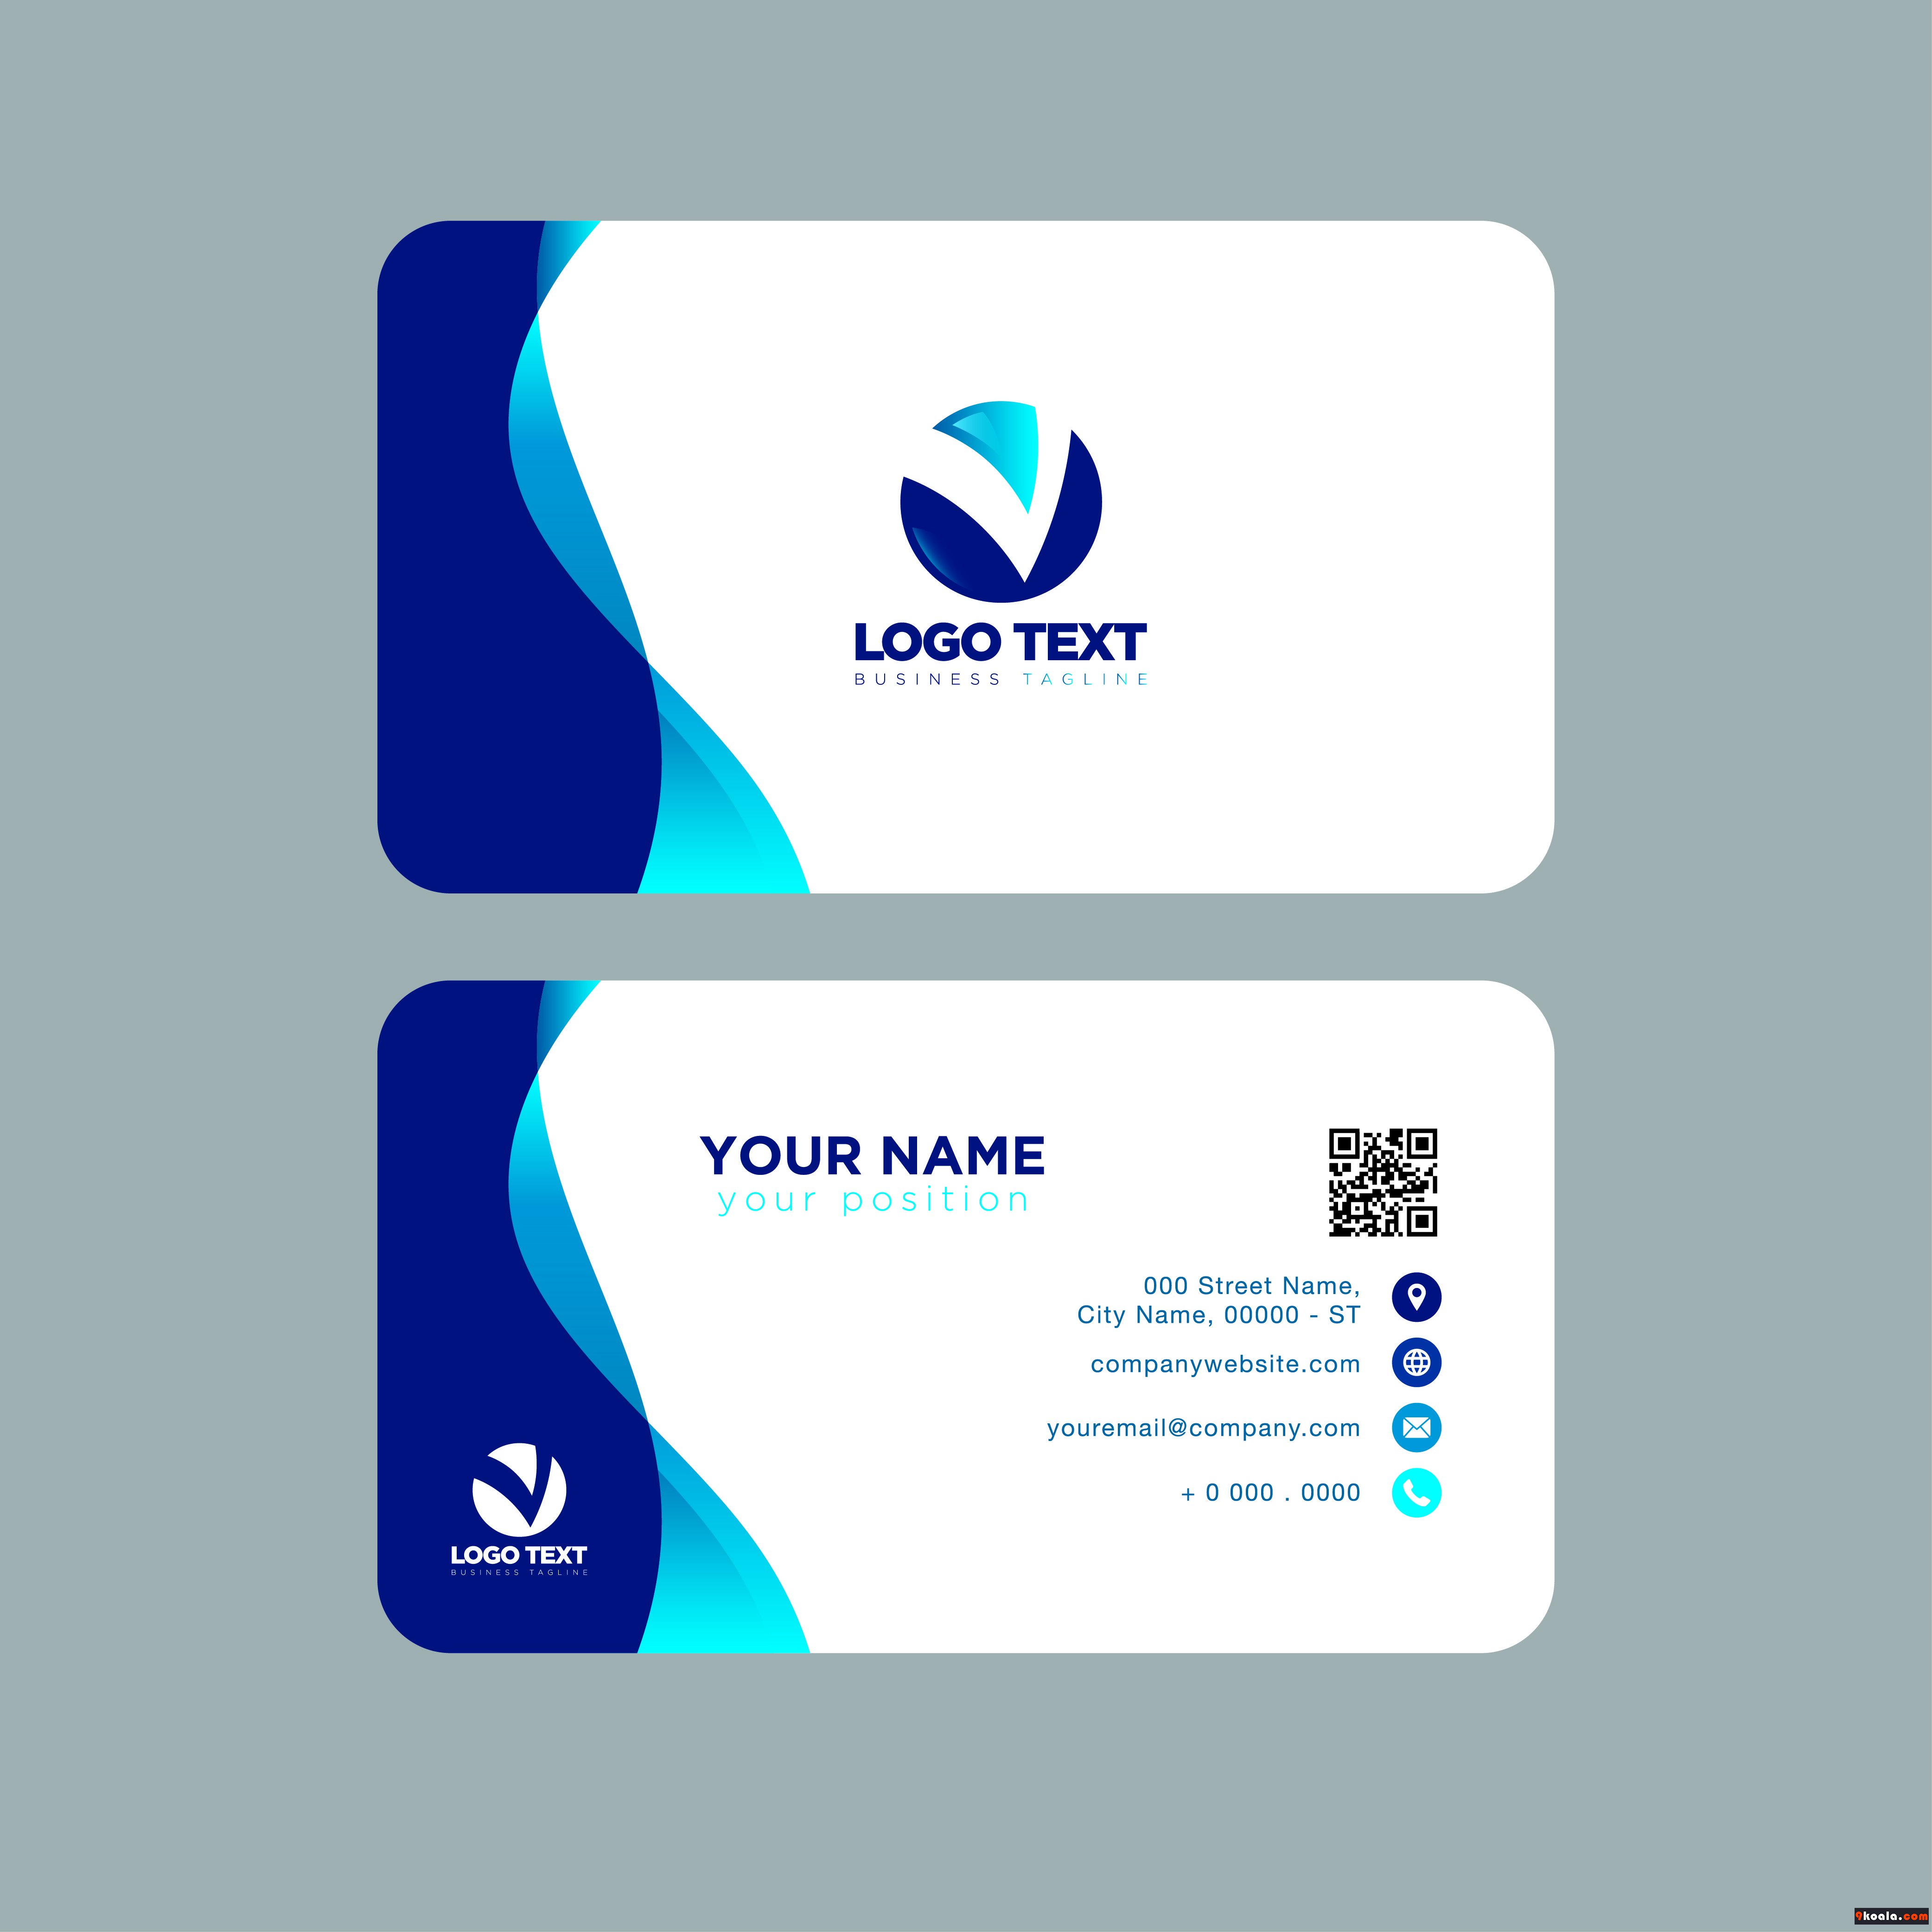 Business Card Illustrator Template Download Free » 22koala.com Best Pertaining To Visiting Card Illustrator Templates Download